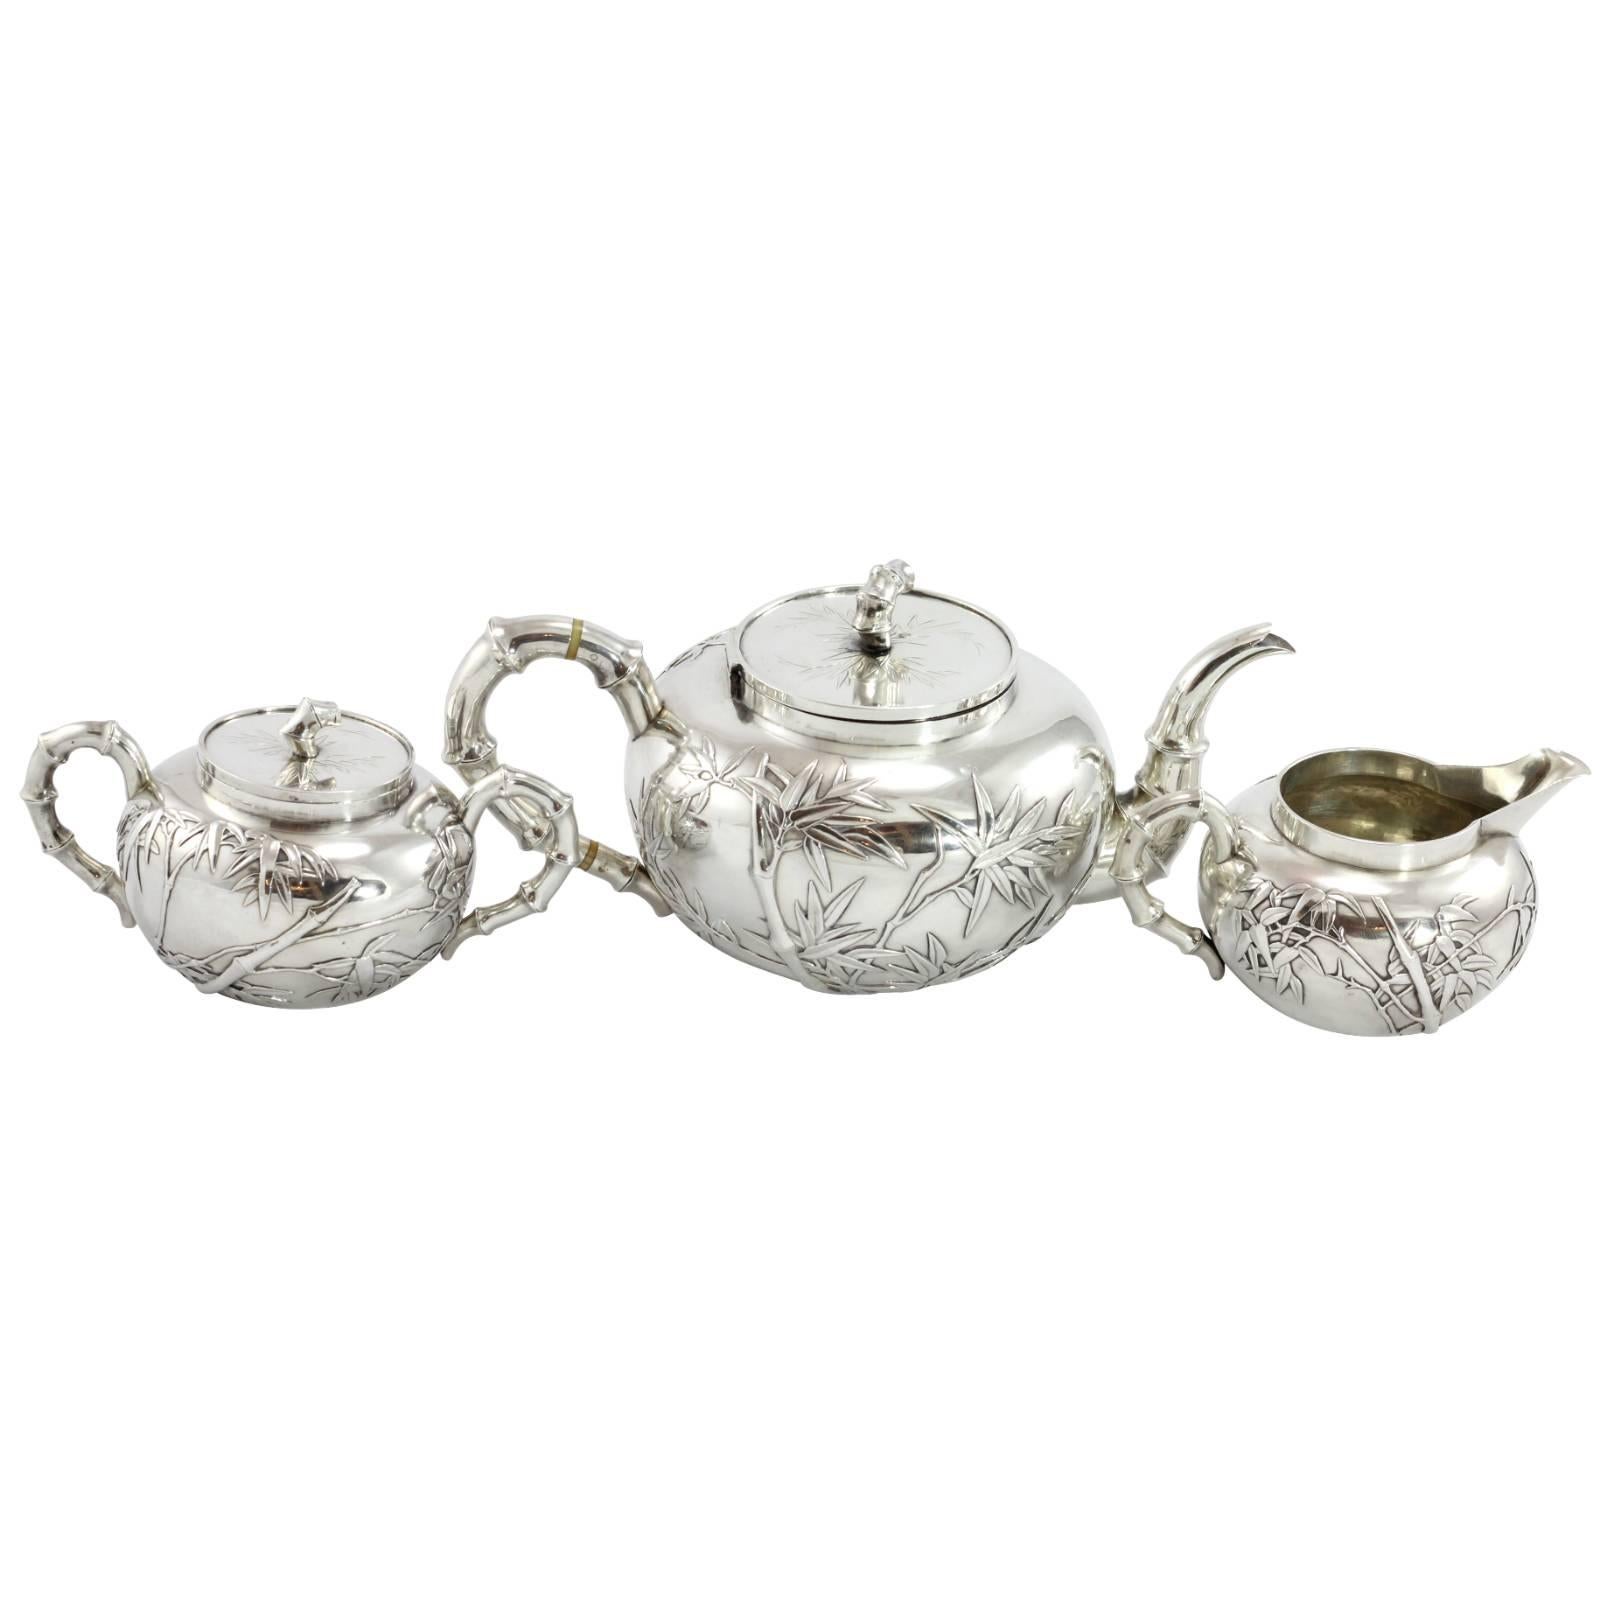 Early 20th Century 3 Piece Chinese Export Silver Tea Set by Wang Hing